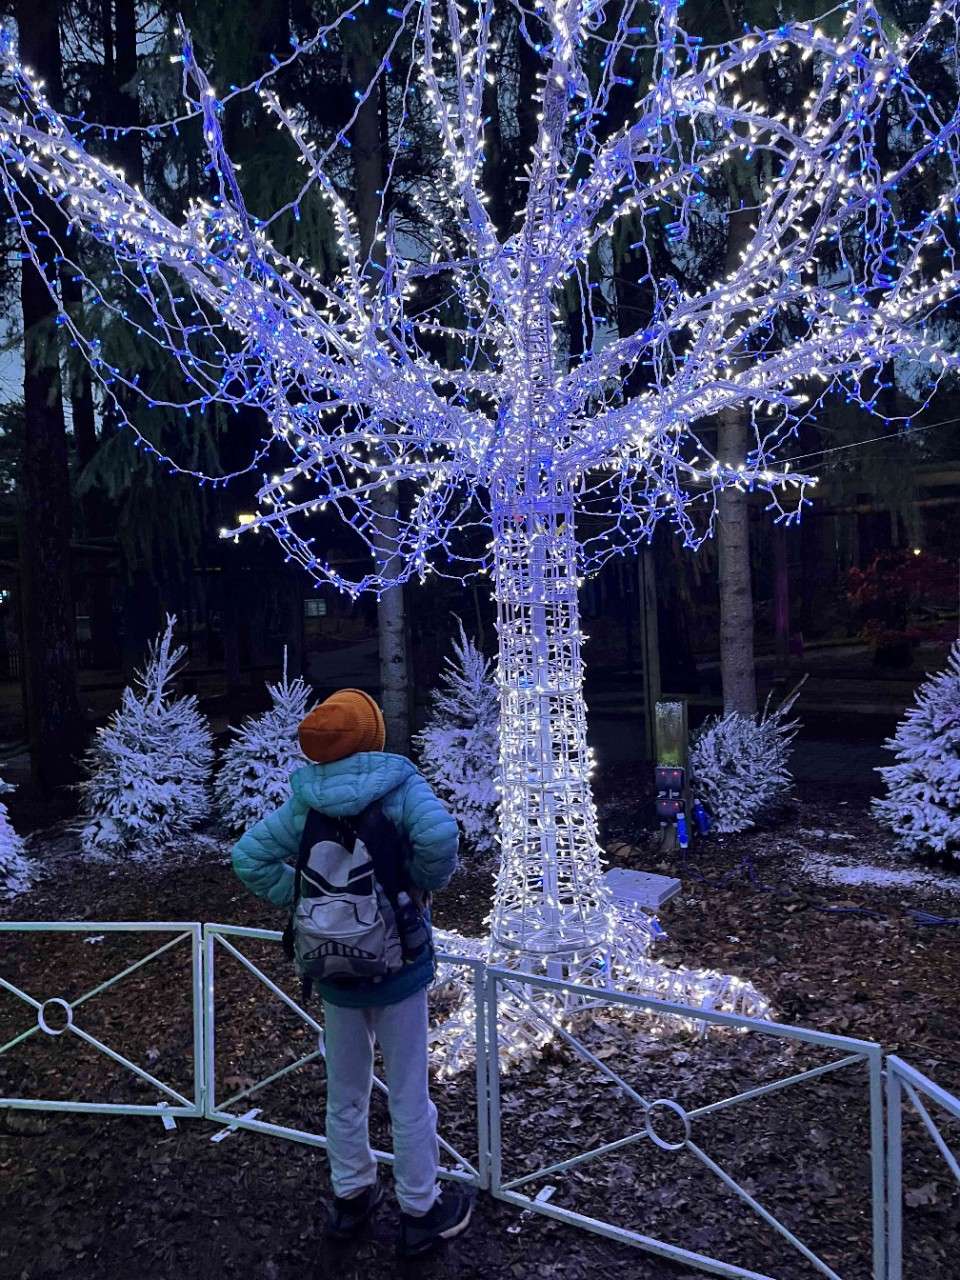 A child looking at a lit up tree in the forest.